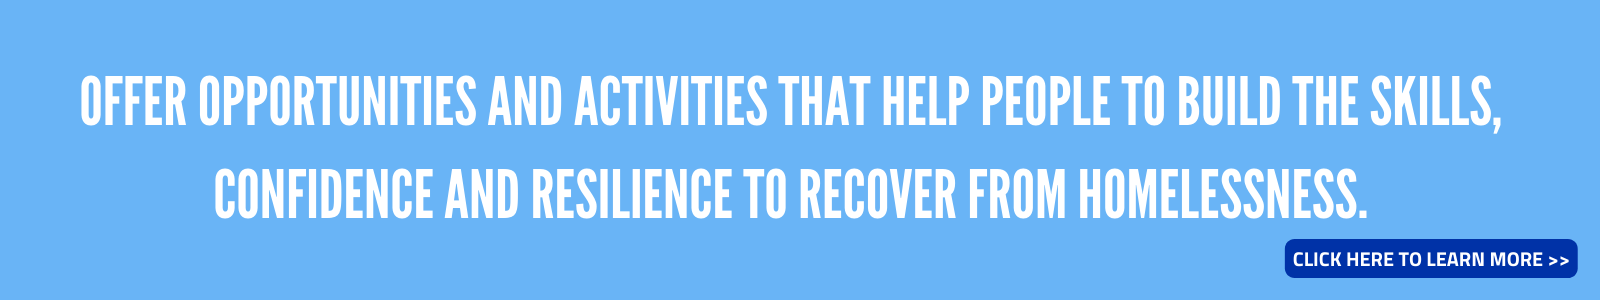 Offer opportunities and activities that help people to build the skills, confidence and resilience to recover from homelessness.